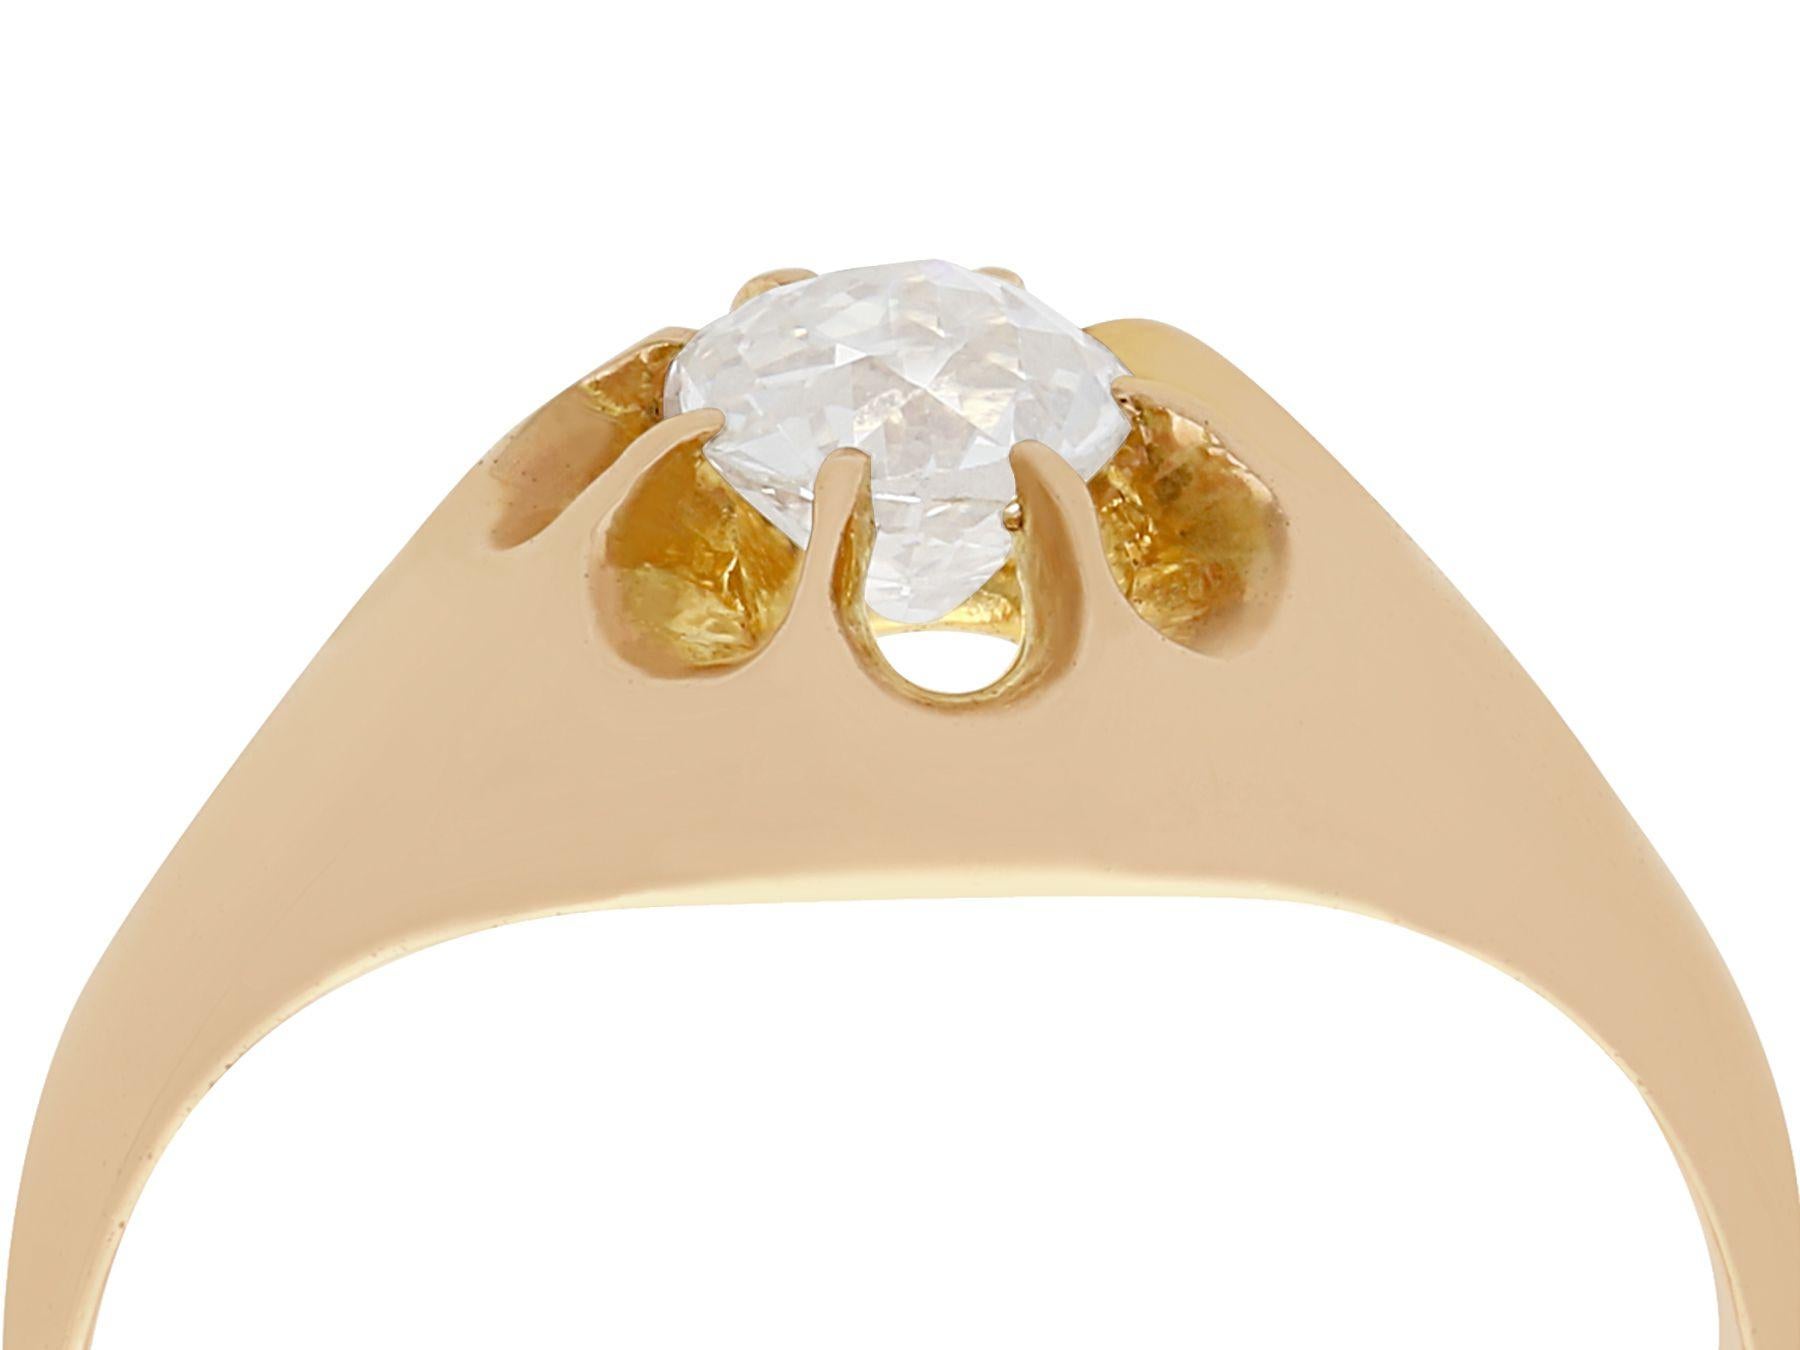 A stunning, fine and impressive antique French 0.64 carat diamond and 12 karat yellow gold gent's dress ring; part of our diverse antique jewelry and estate jewelry collections.

This stunning, fine and impressive gent's antique diamond ring has